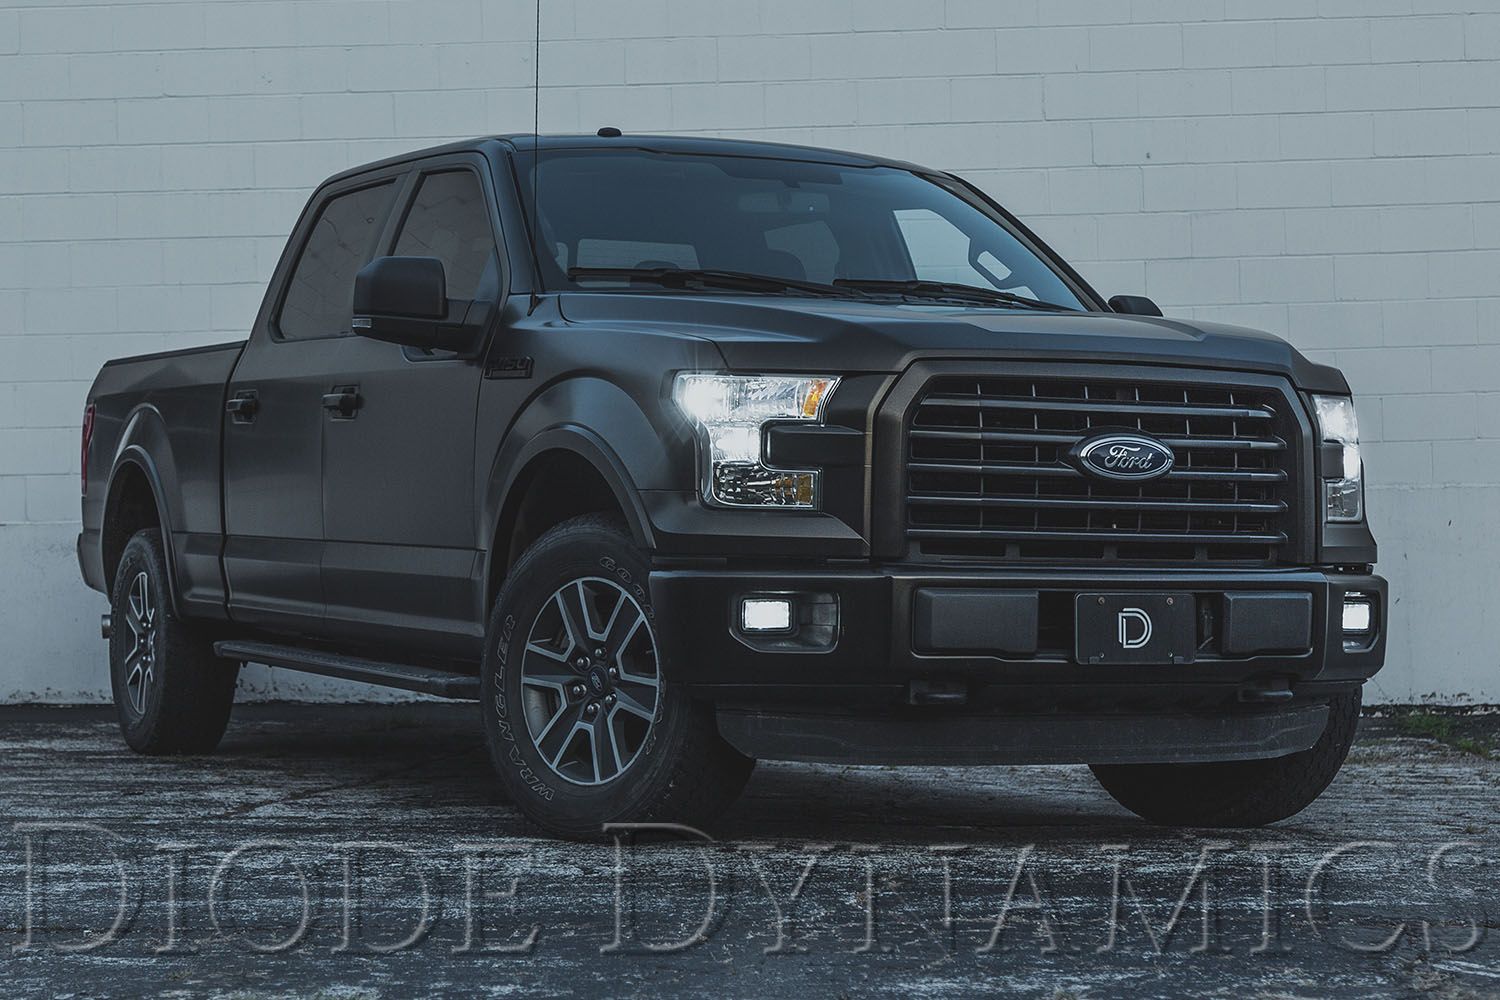 Top LED Lighting Upgrades for the 2015-2017 Ford F-150